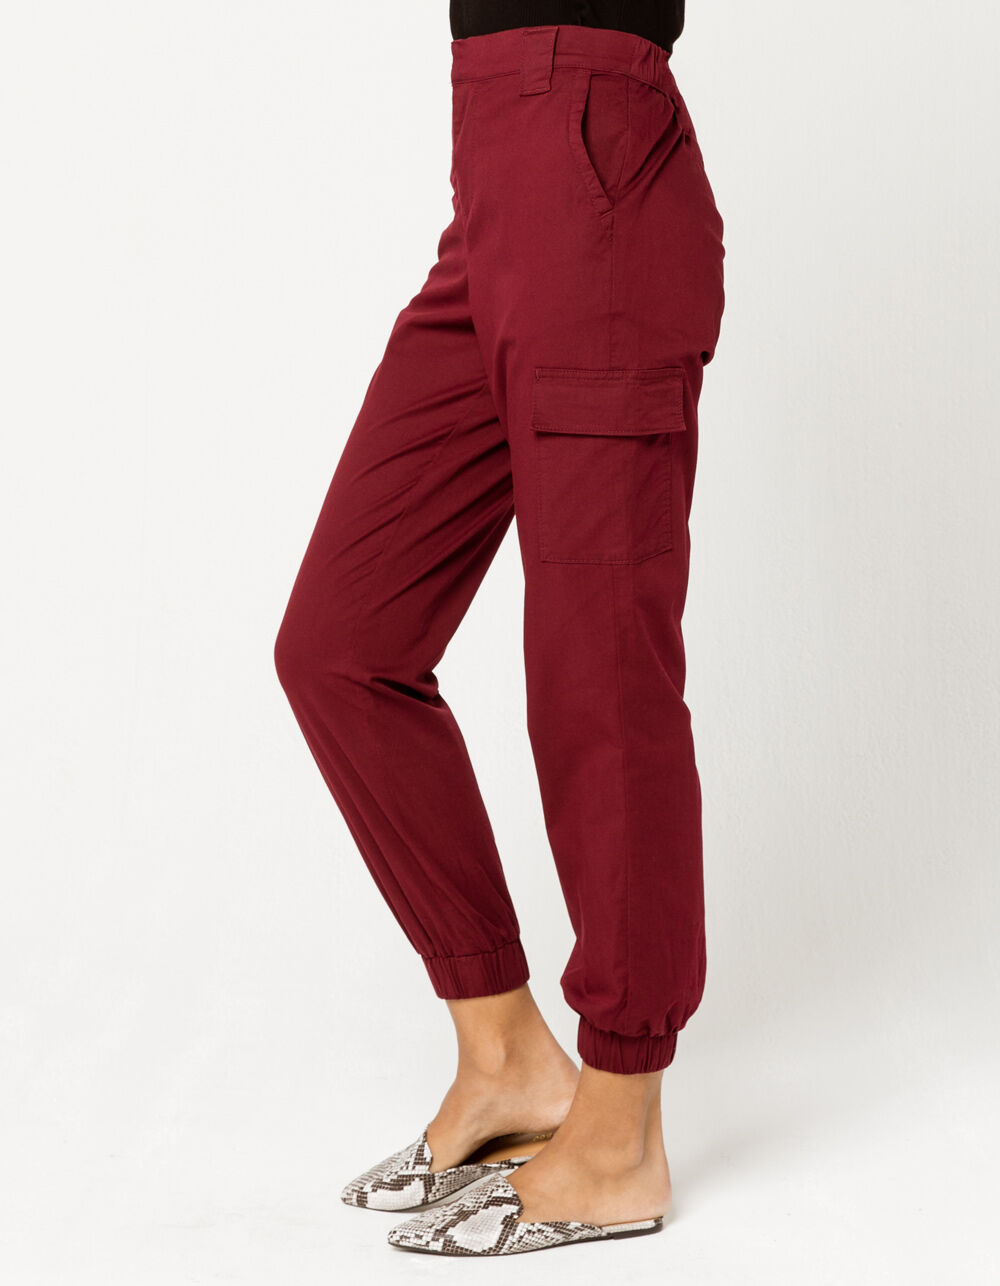 SKY AND SPARROW Cargo Womens Jogger Pants - WINE | Tillys